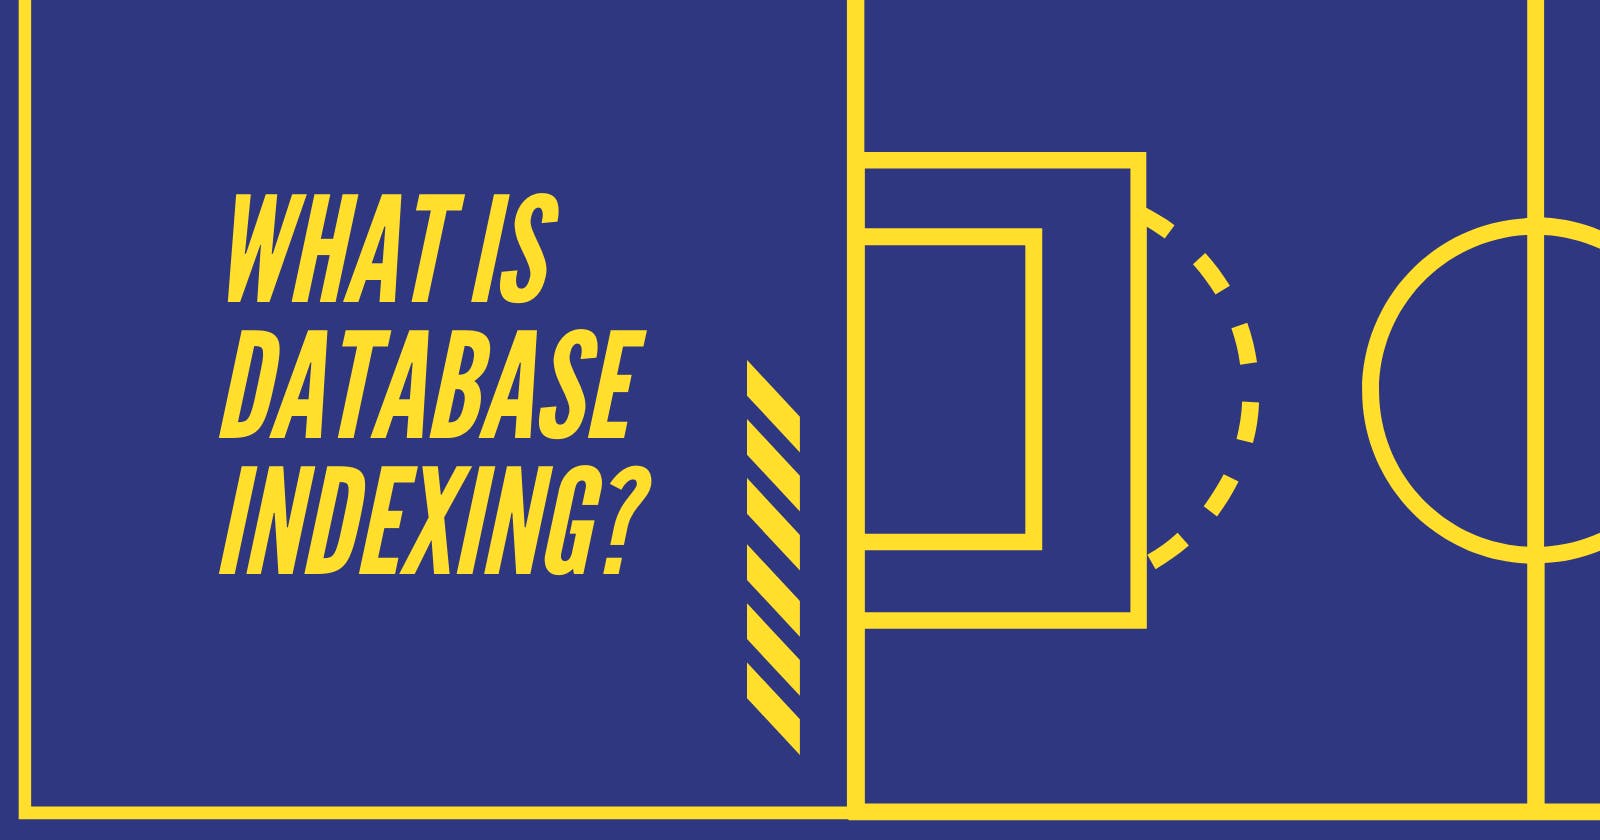 What is Database Indexing?